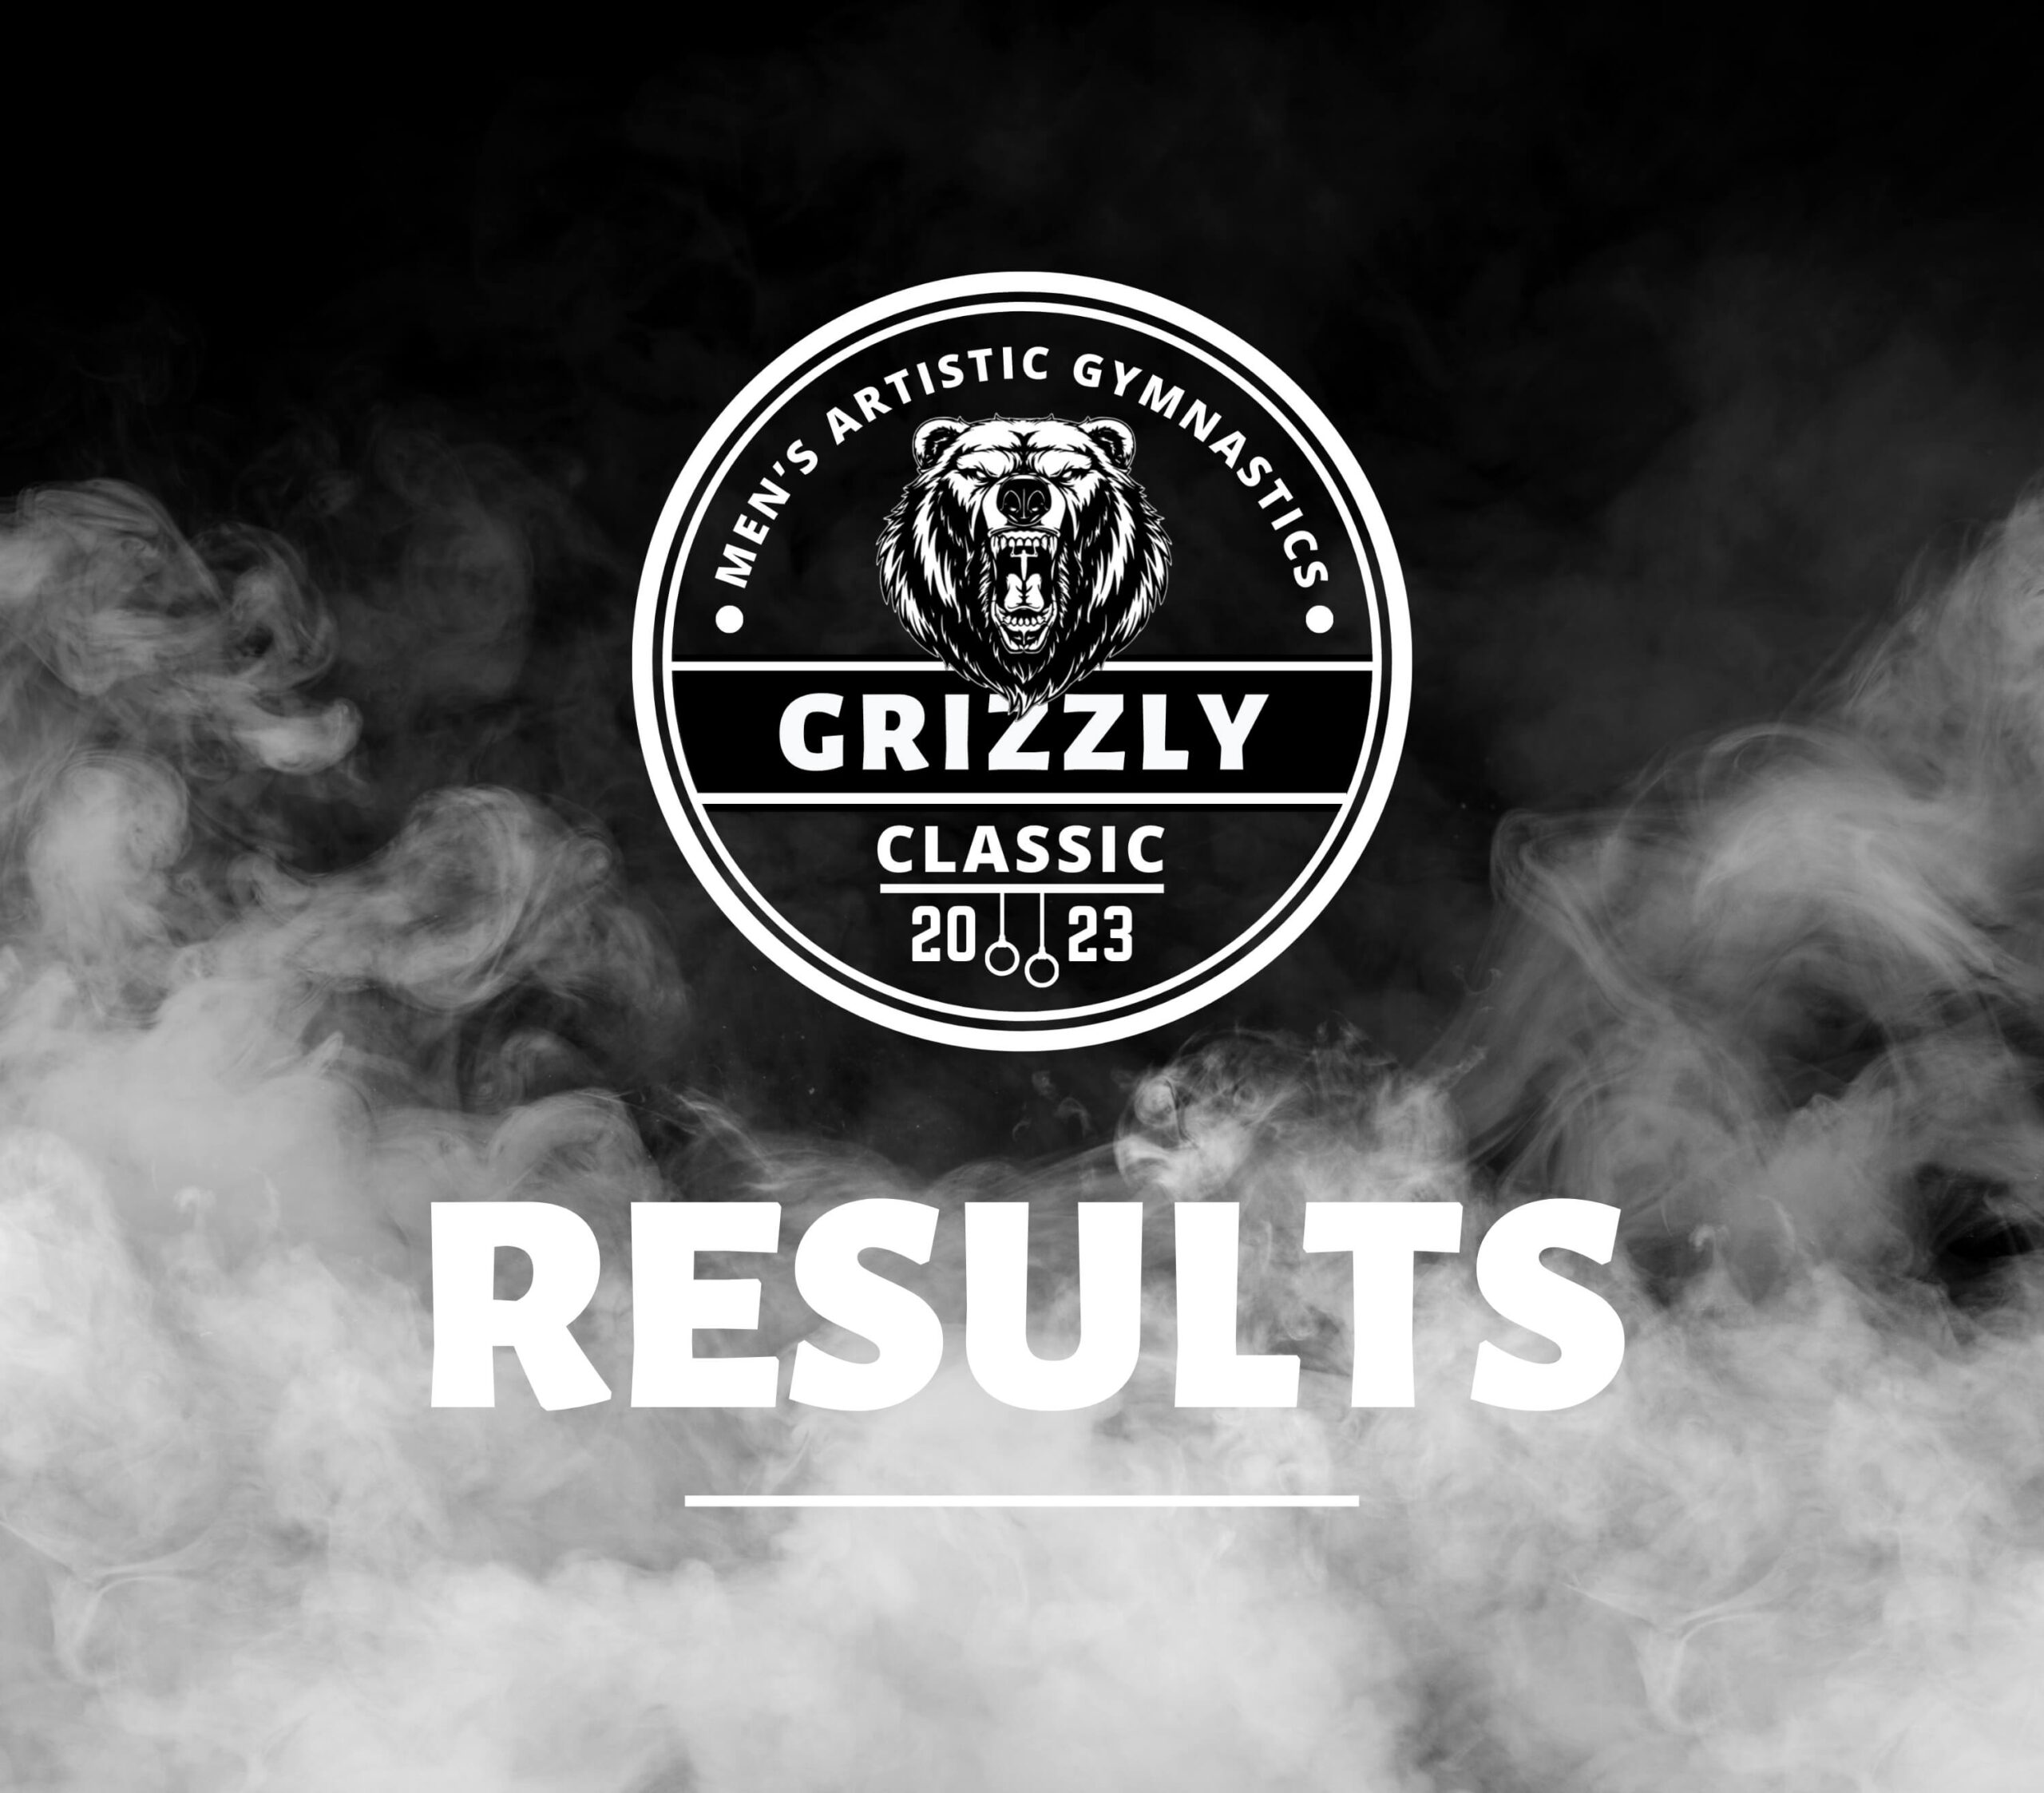 Grizzly Classic Men's Artistic Gymnastics Competition 2023 Results